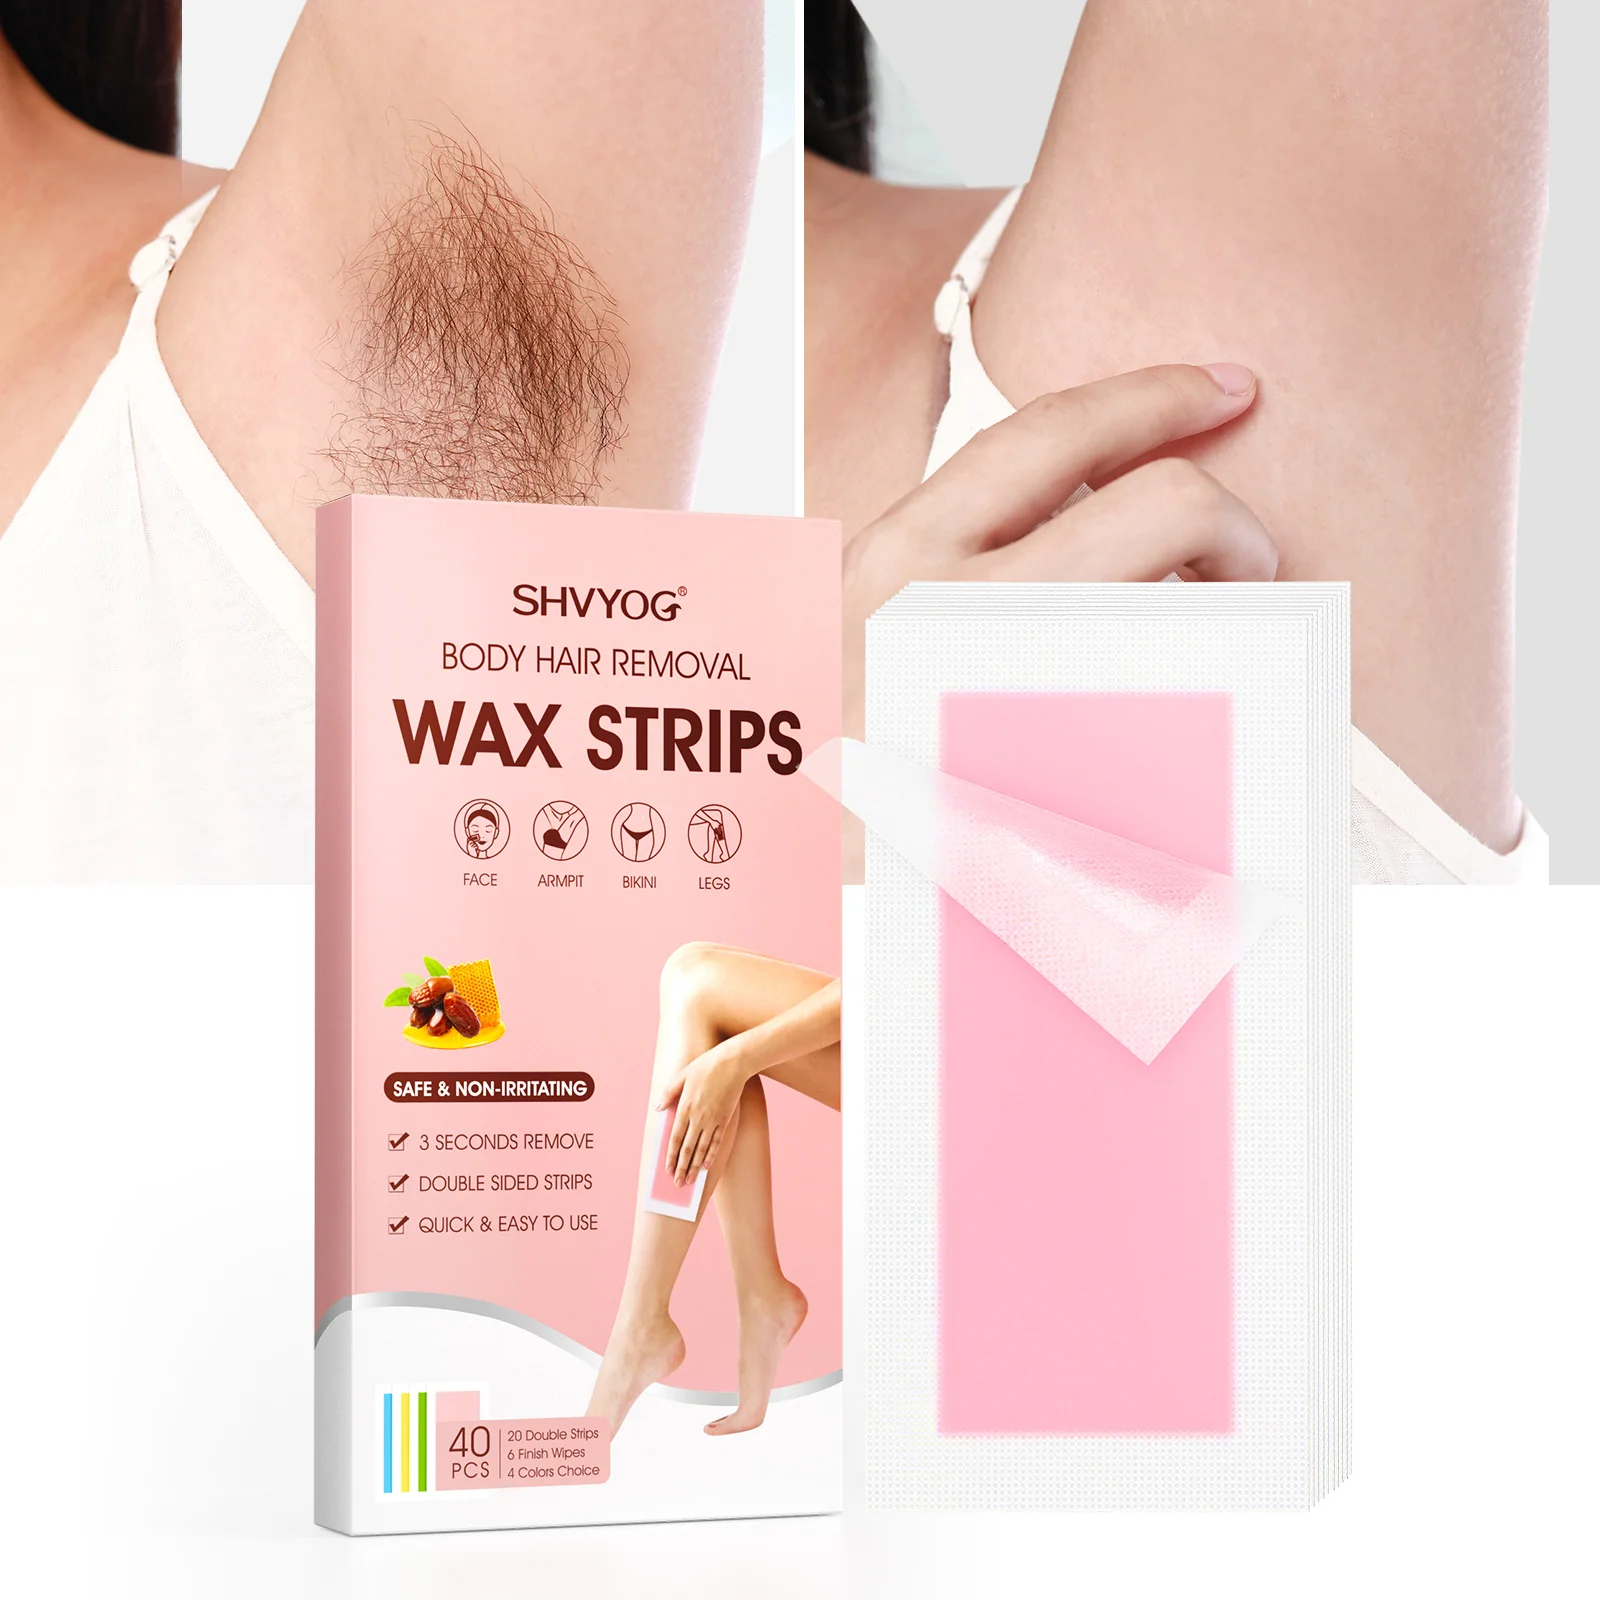 Oem Odm Body Hair Removal Wax Kit For Bikini Face Arm Armpit Leg Eyebrow 40  Count Large Size Waxing Strips With 6 Finished Wipes - Buy Wax Hair Removal  For Women,Hair Removal